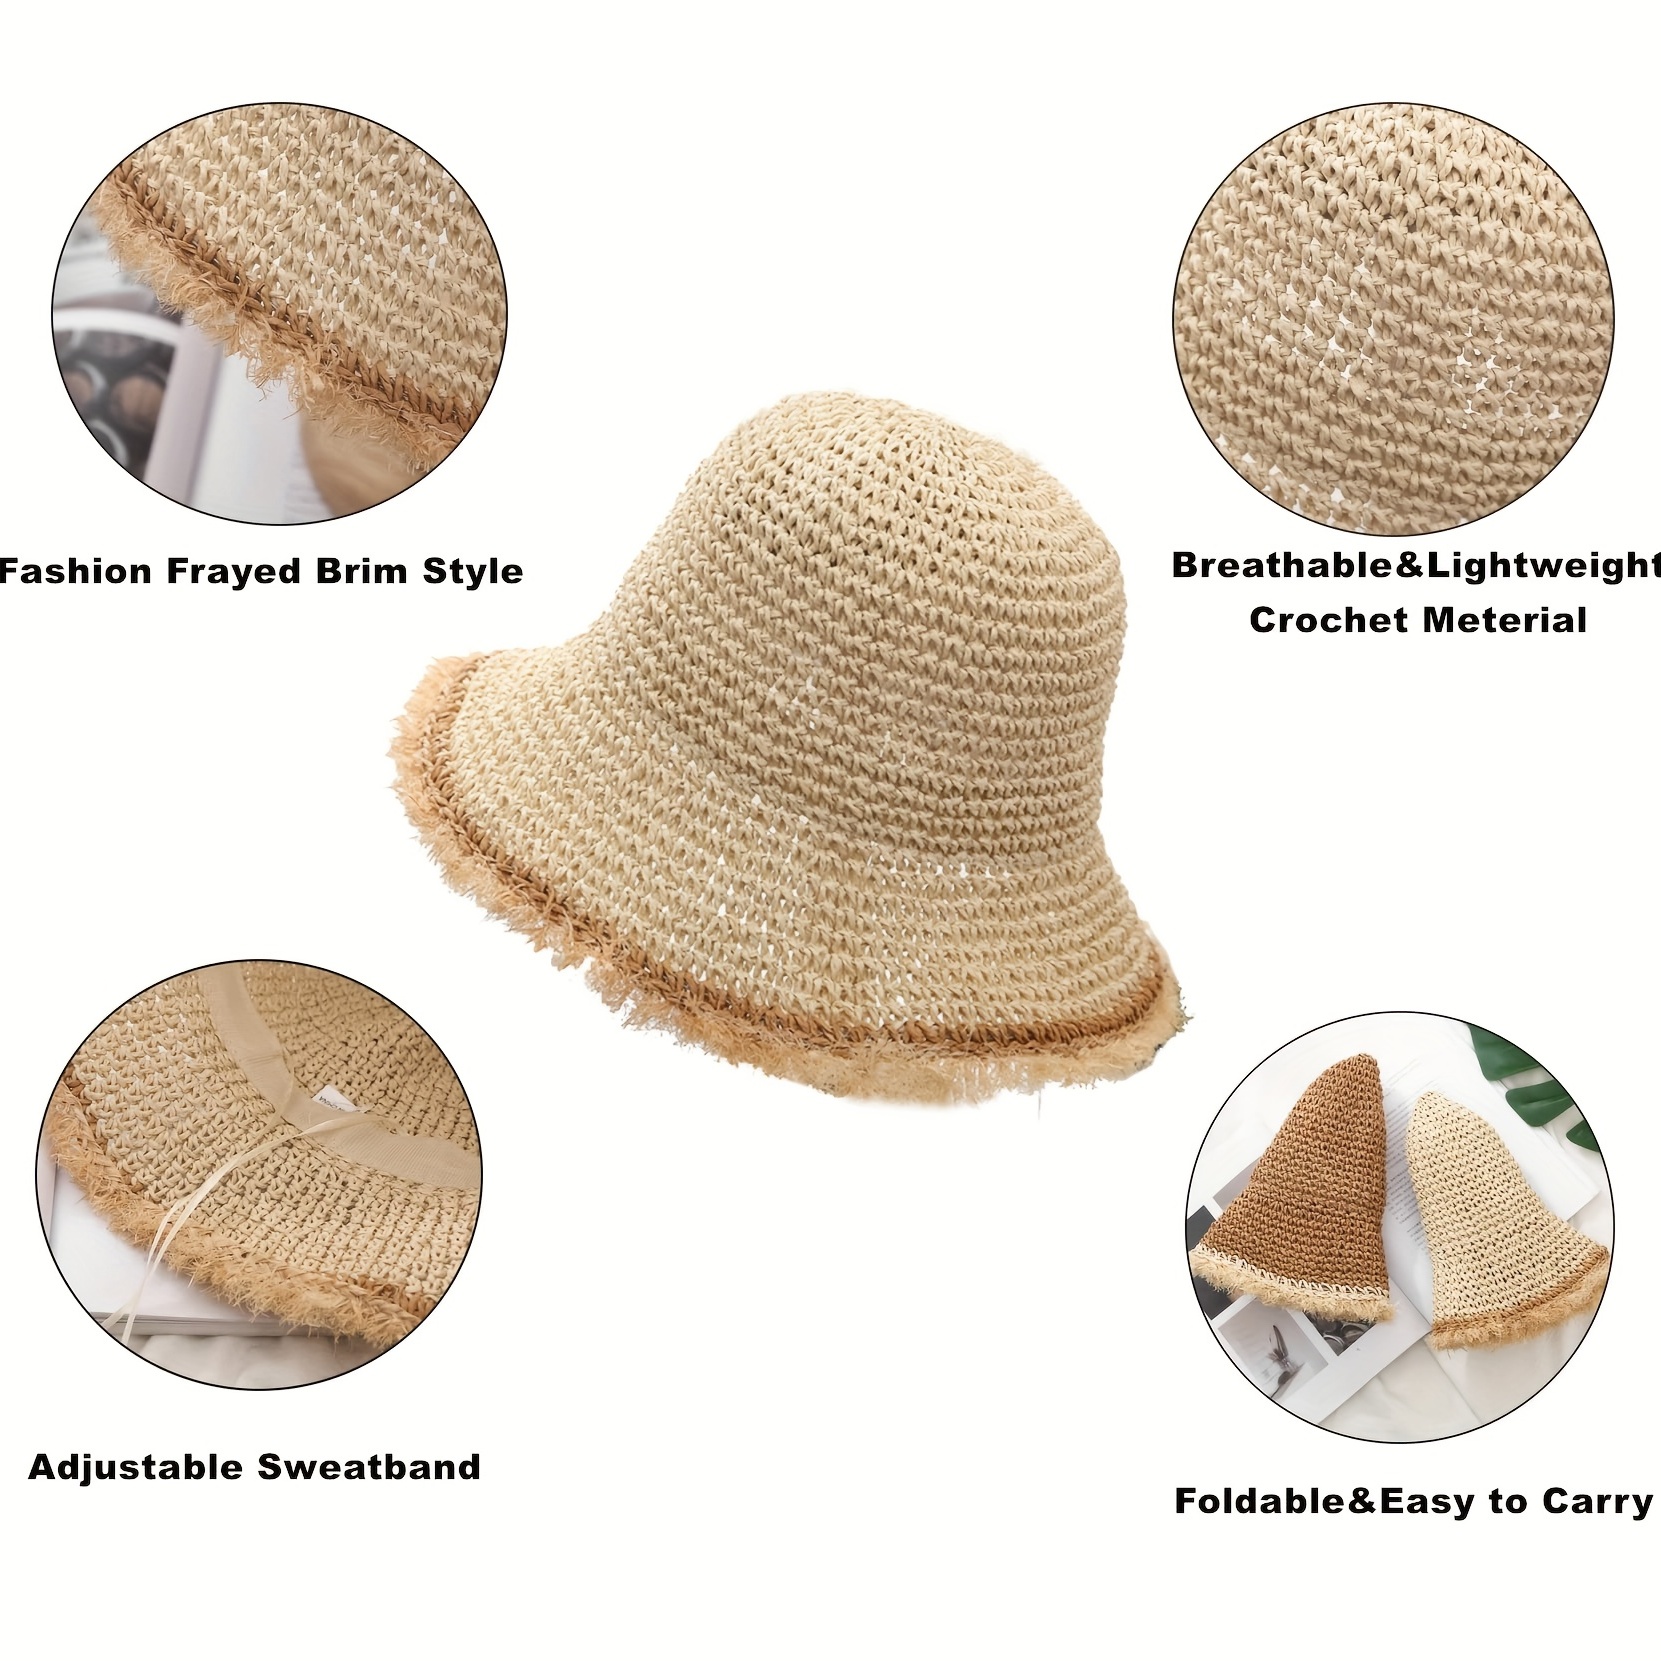 Quick Drying Packable Bucket Hat Wide Brim Breathable Sun Hats